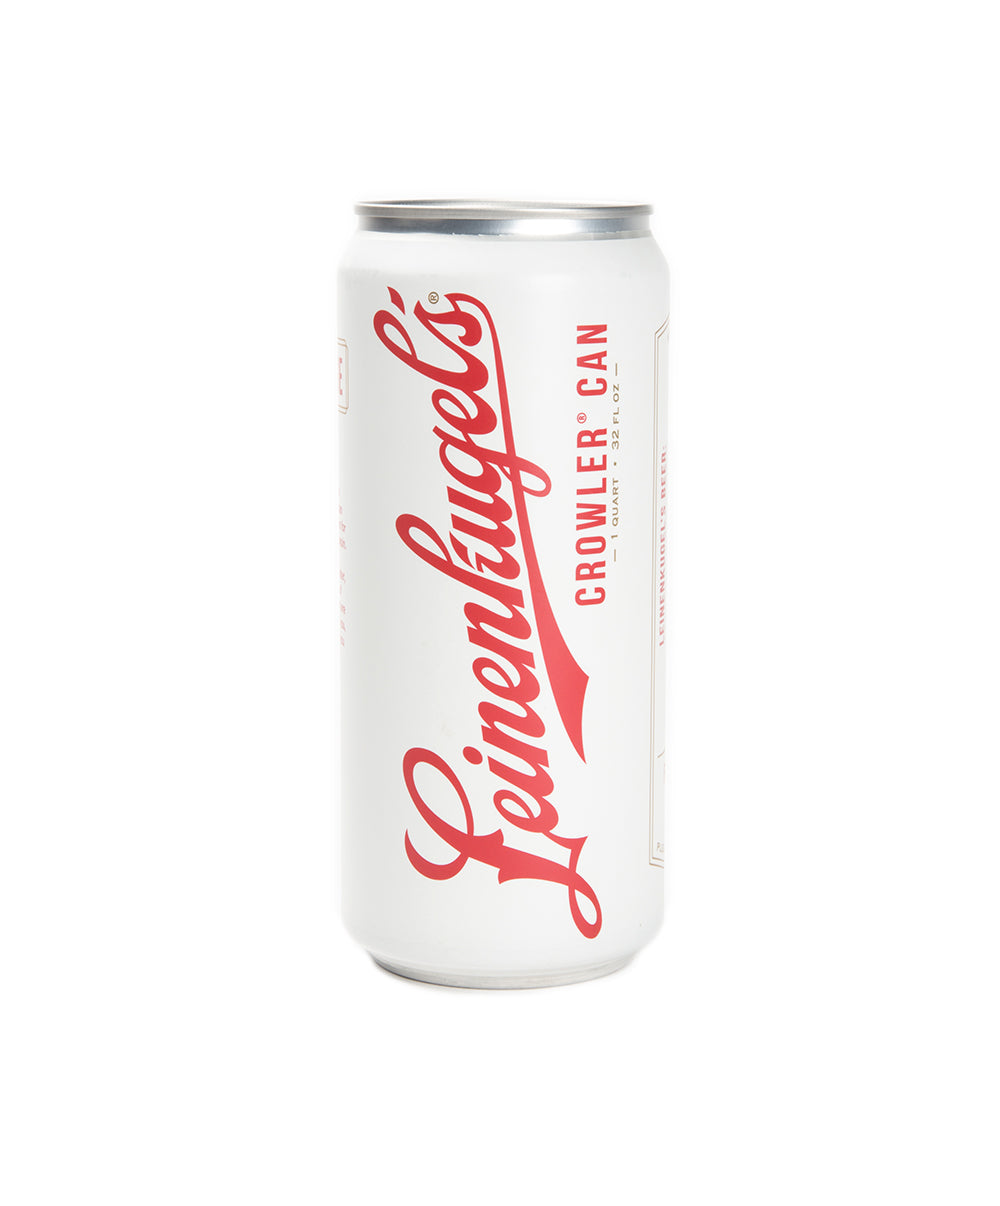 LEINIE'S ICE CROWLER CAN